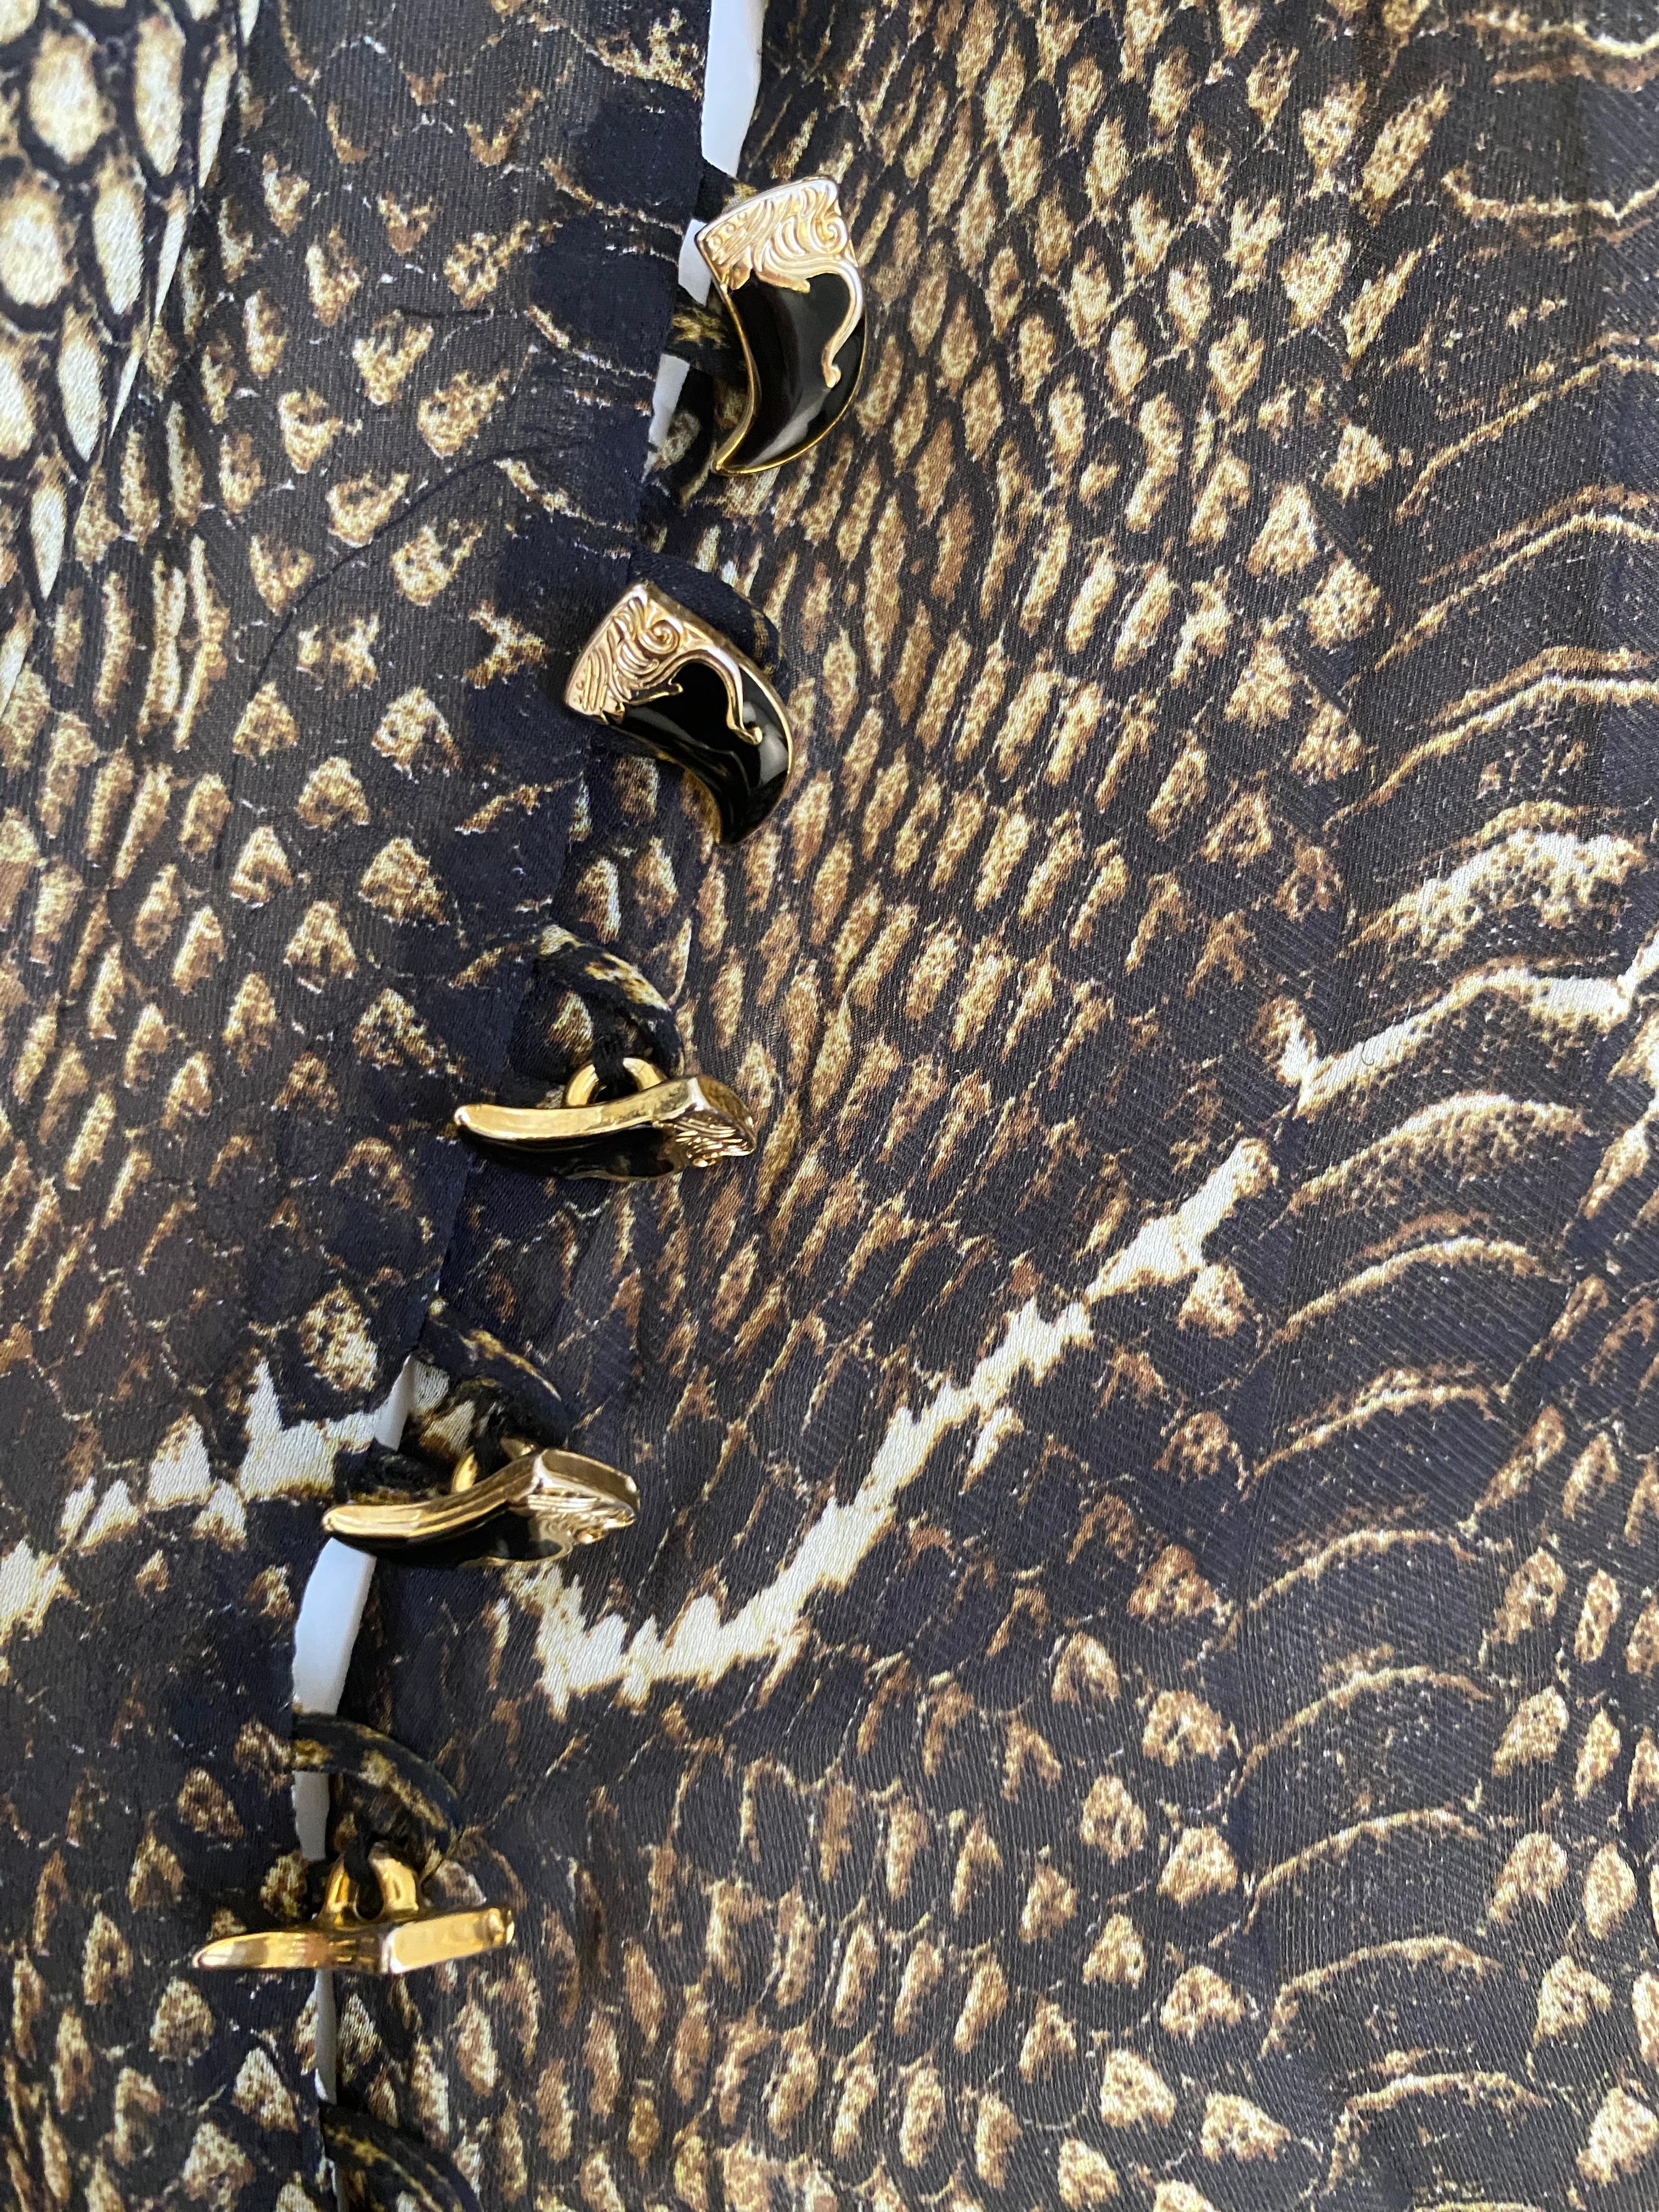 Roberto Cavalli Snake Skin Print Silk Chiffon Cocktail Dress In Good Condition For Sale In Beverly Hills, CA